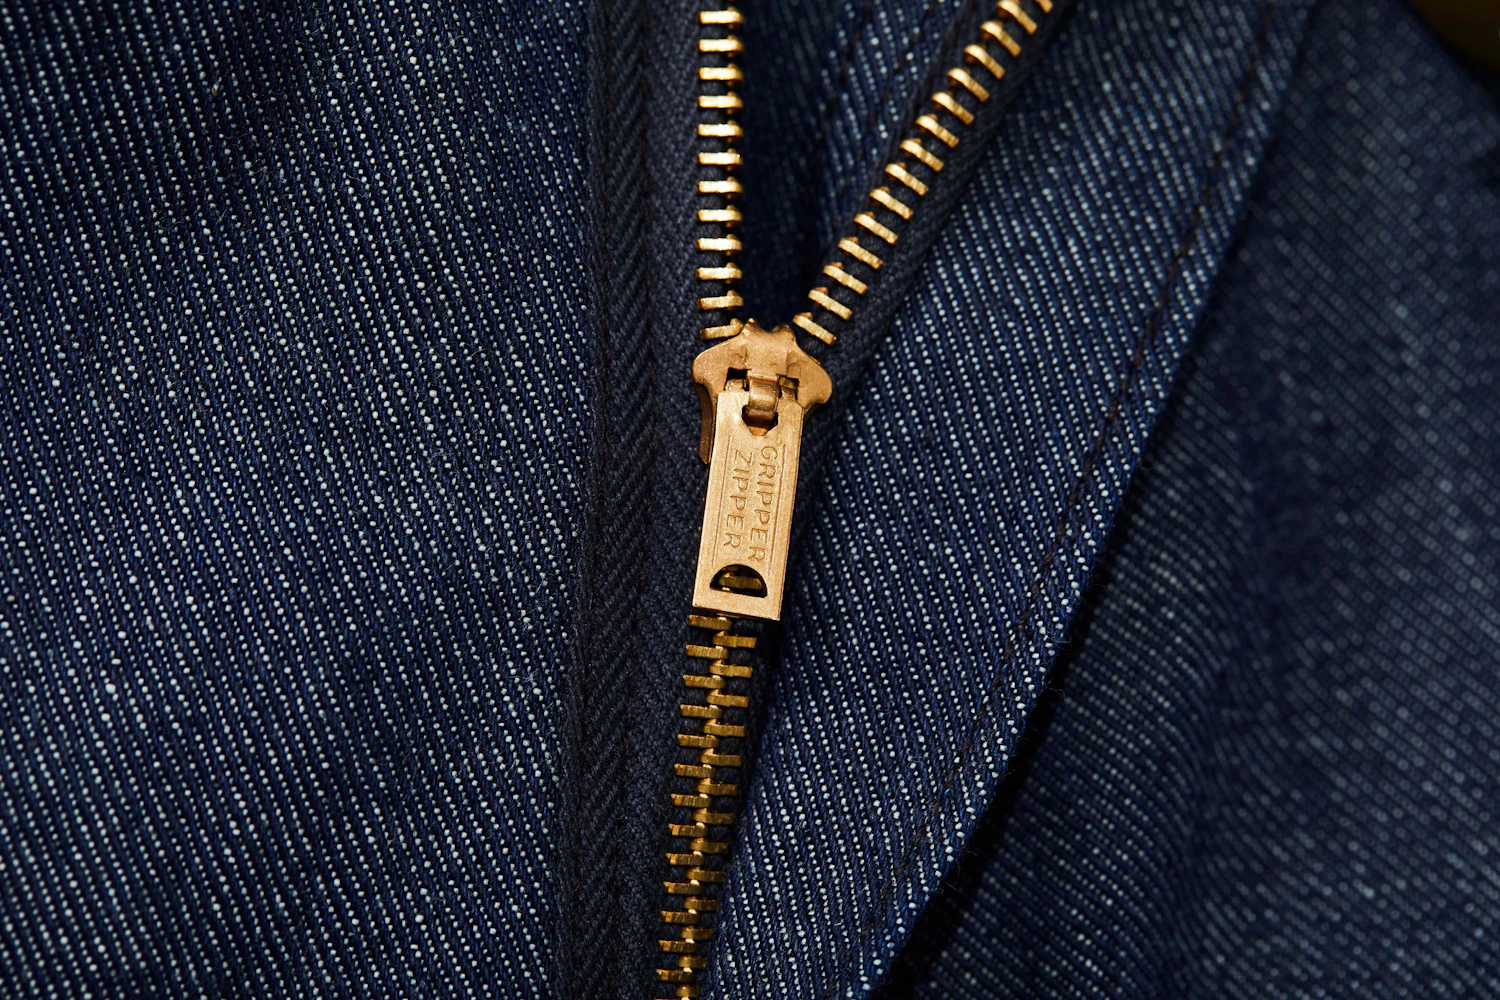 The Gripper Zipper Company's double-clawed zip up